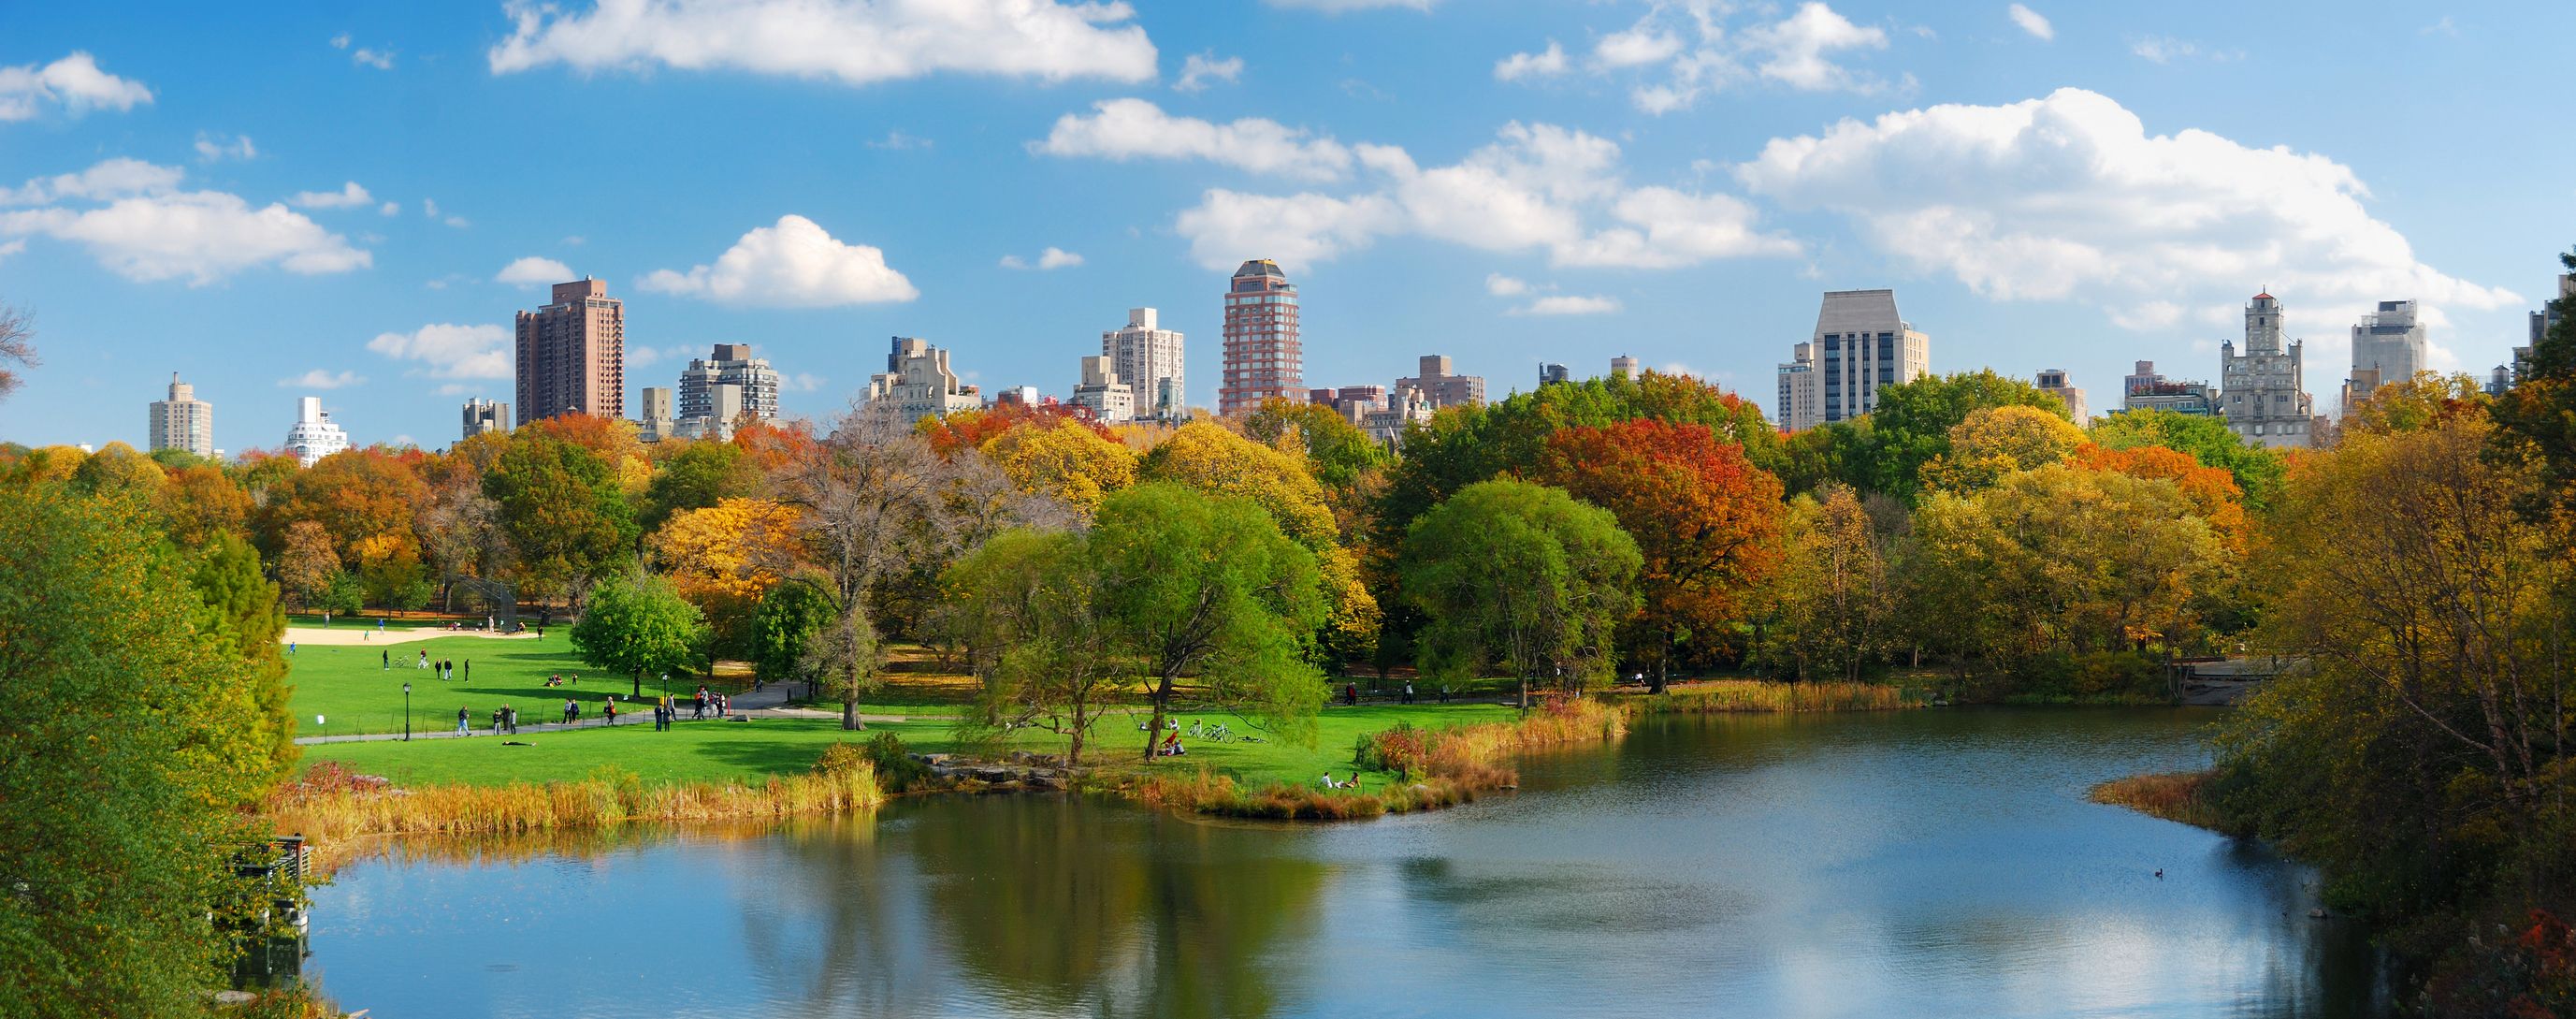 New York City Central Park featuring fall foliage